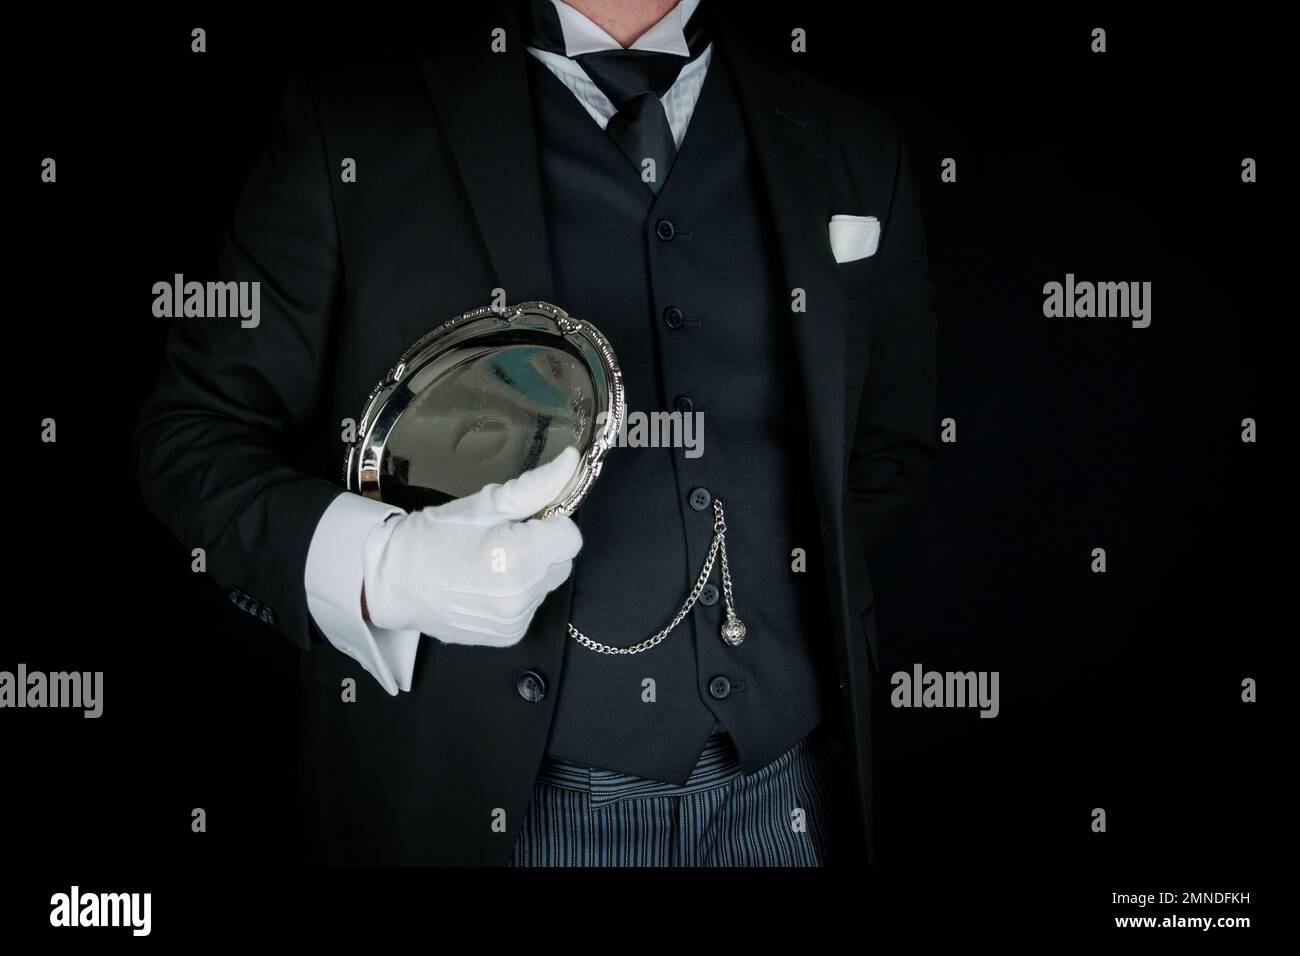 Portrait of Vintage Butler in Dark Suit and White Gloves Elegantly Holding Silver Serving Tray. Service Industry and Professional Courtesy. Stock Photo